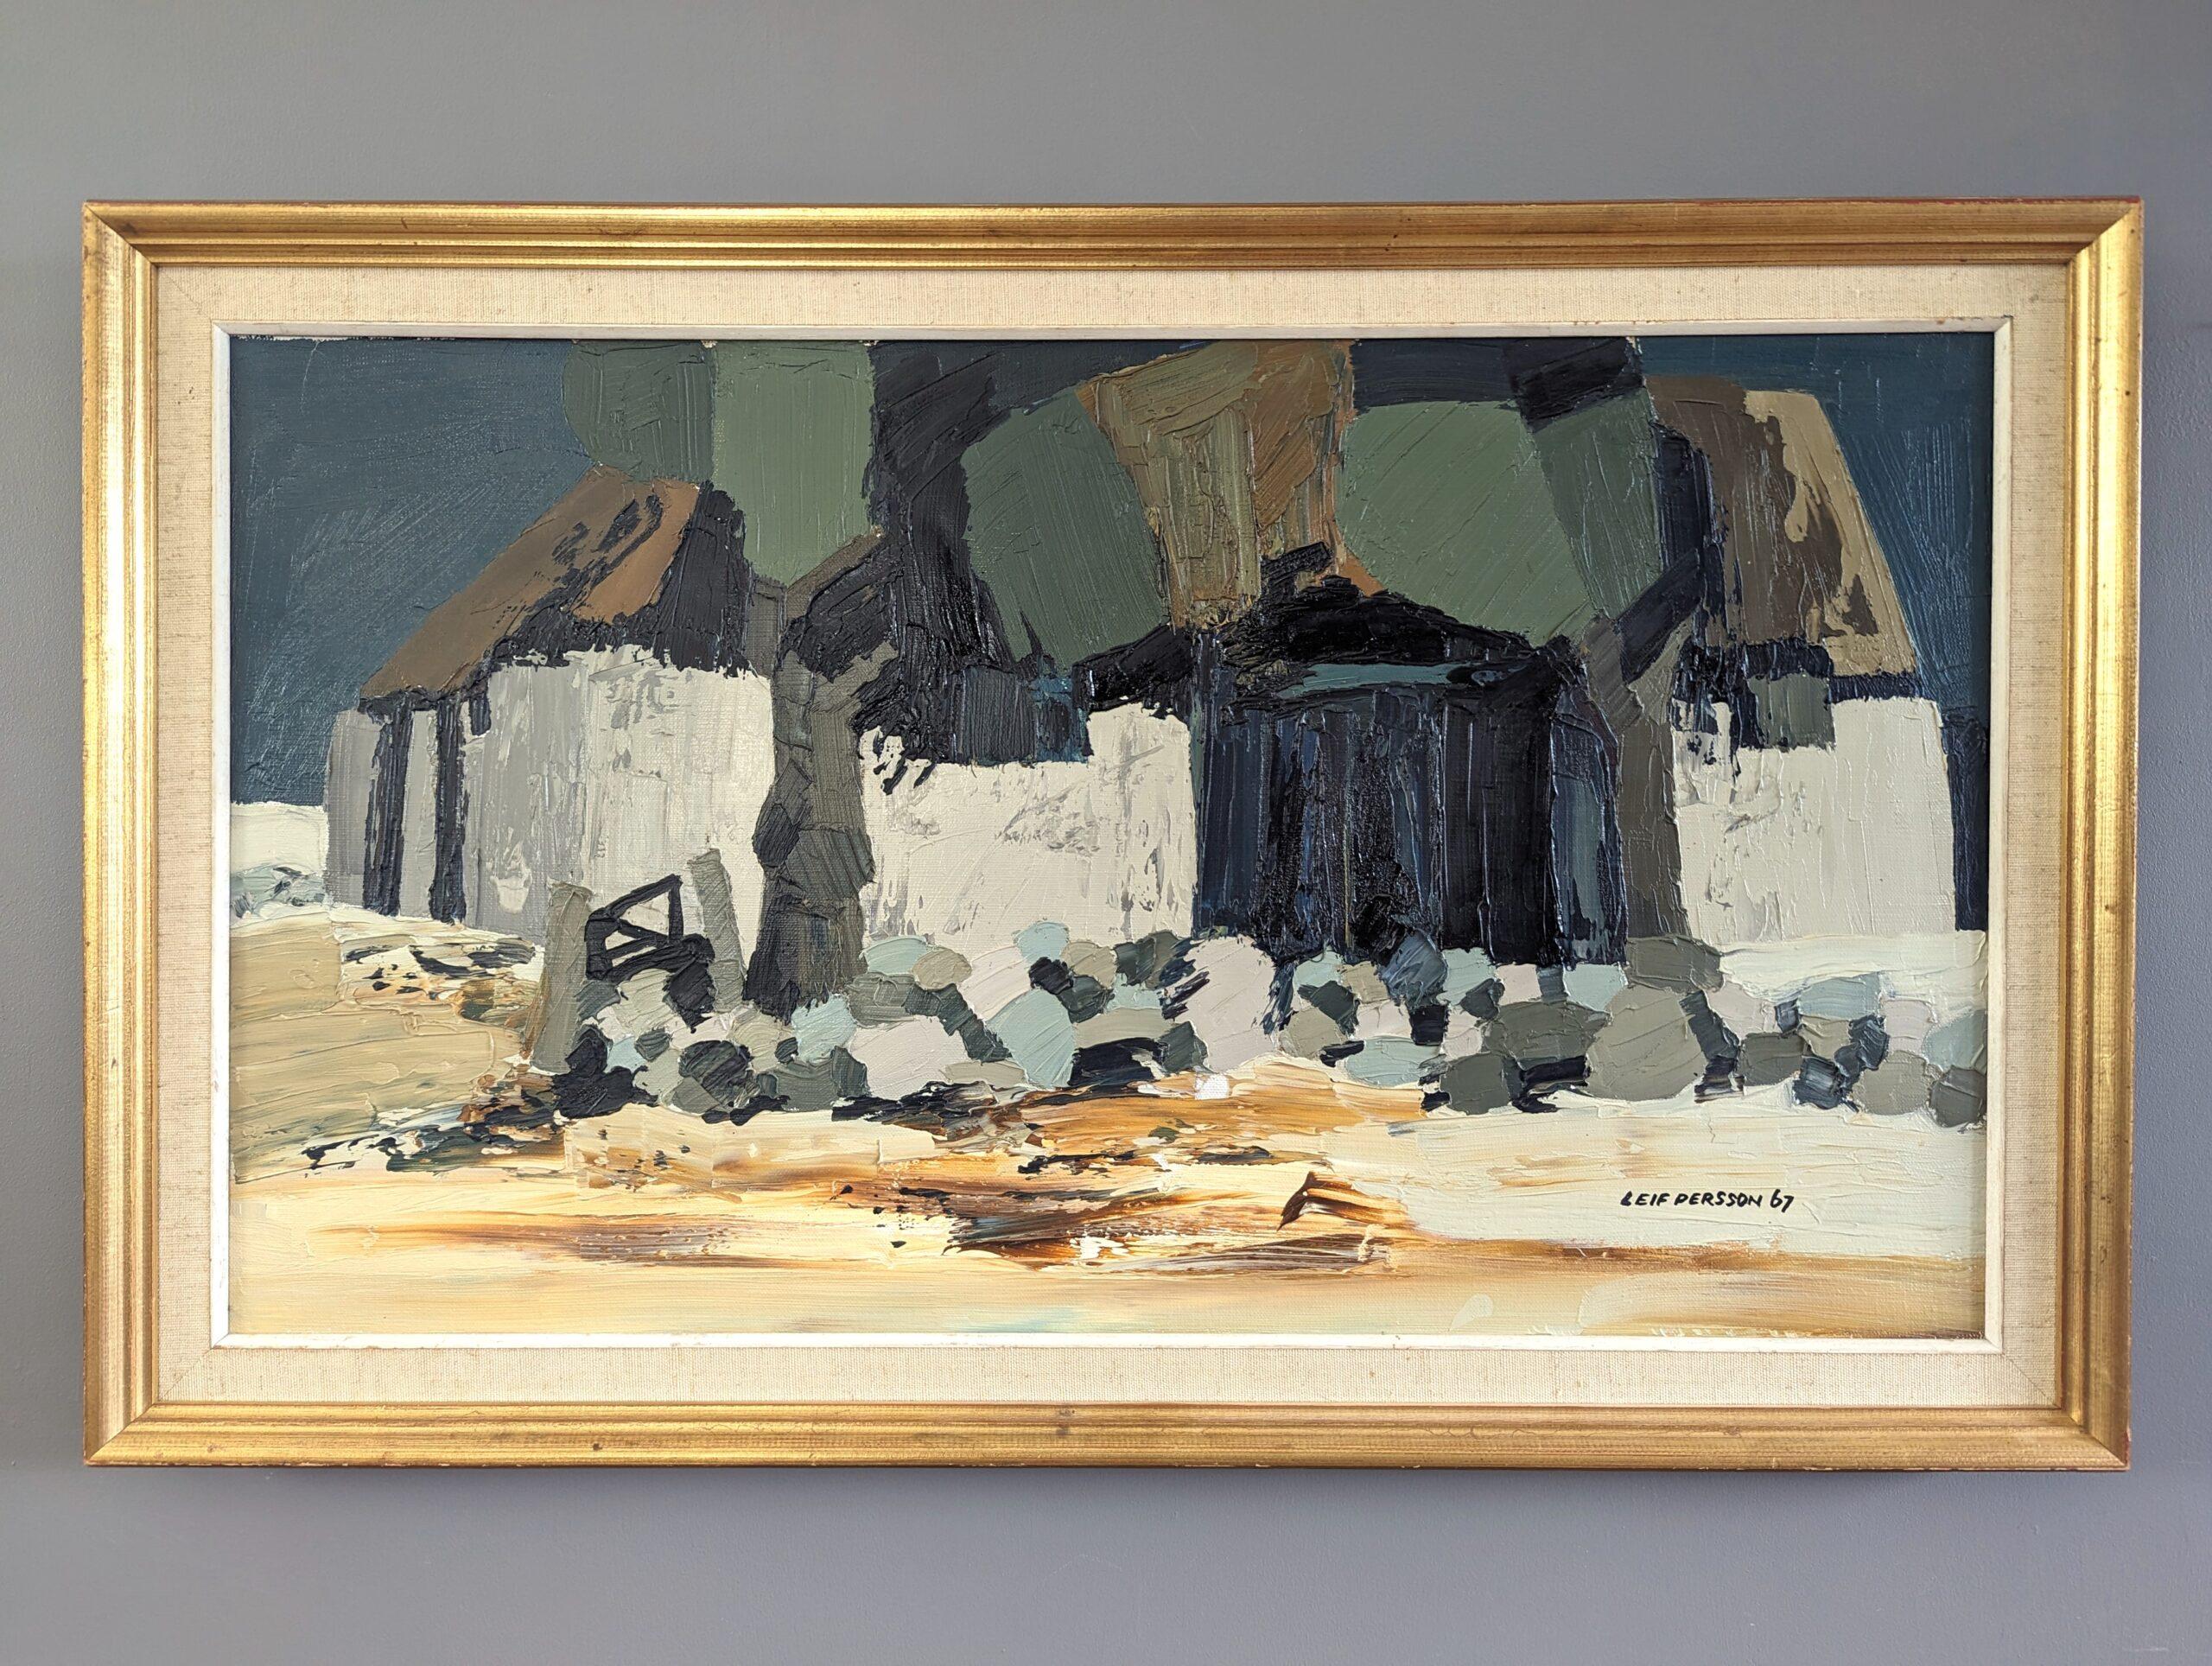 NATURE DWELLINGS
Size: 42.5 x 68 cm (including frame)
Oil on Canvas

A brilliantly executed semi-abstract composition, painted in oil onto canvas and dated 1967.

In this abstract nature landscape, all realistic details have been omitted and we can